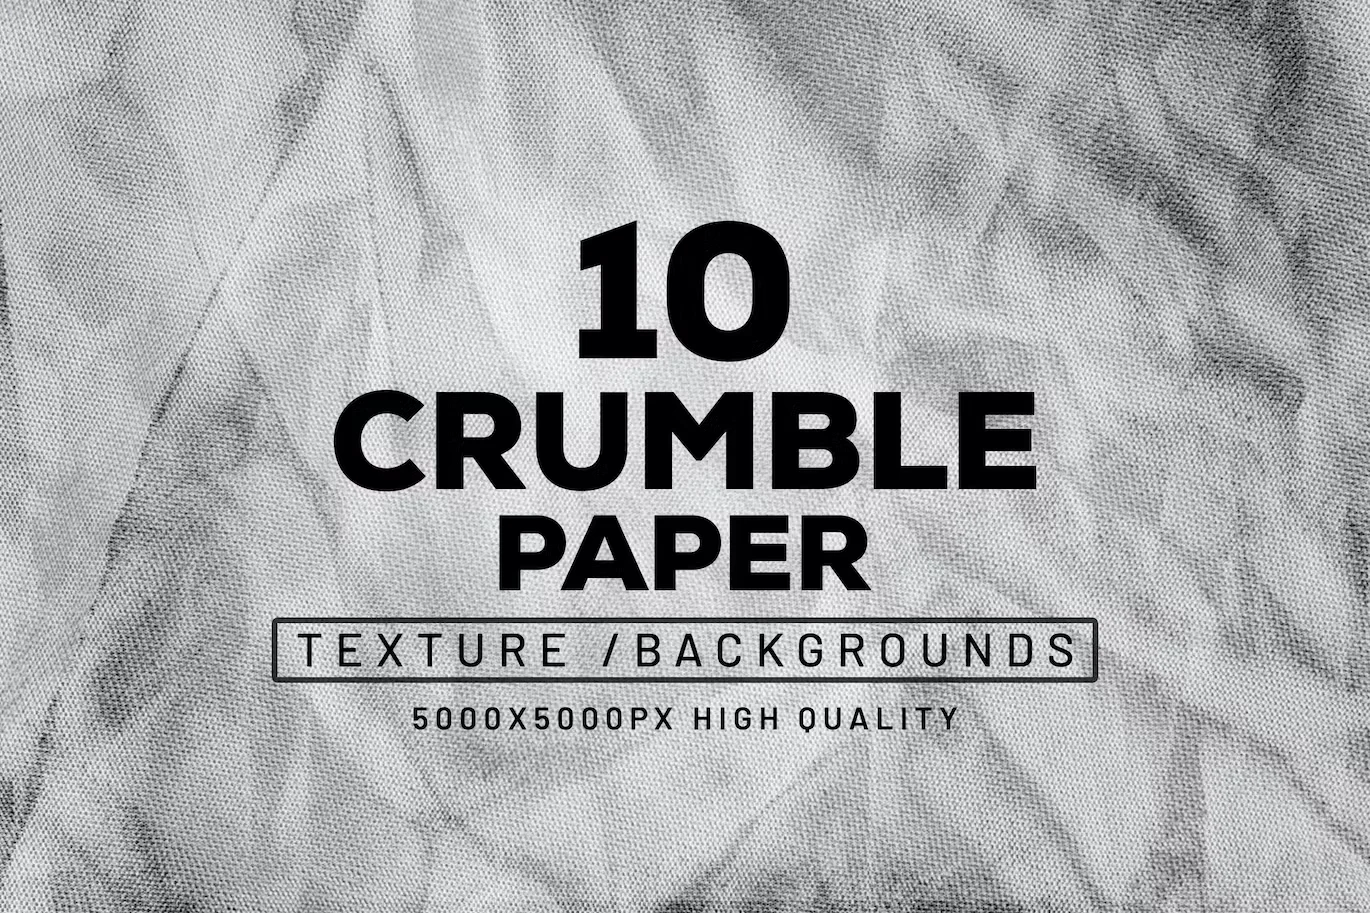 Crumble Paper Texture Background